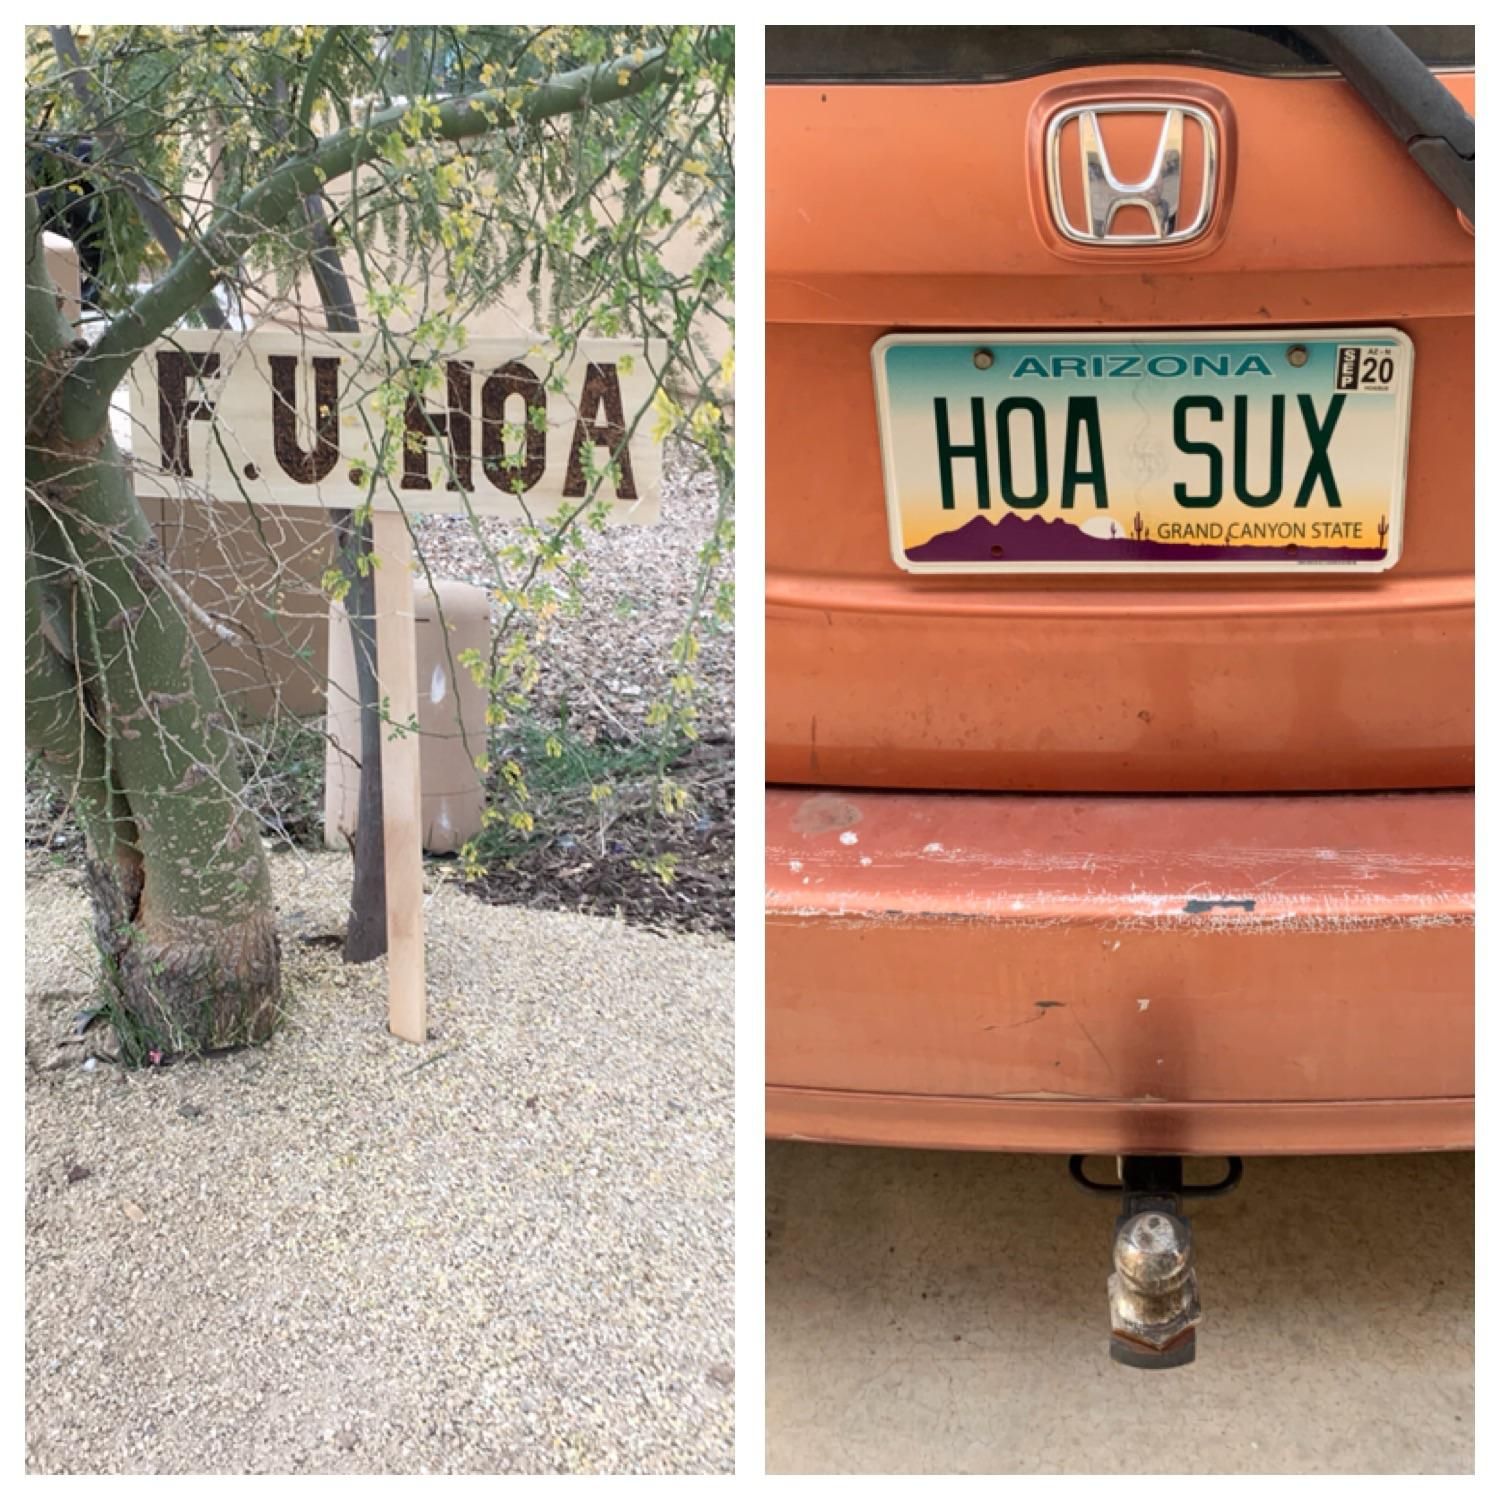 Got fined by HOA for sign on left, so I one upped them.